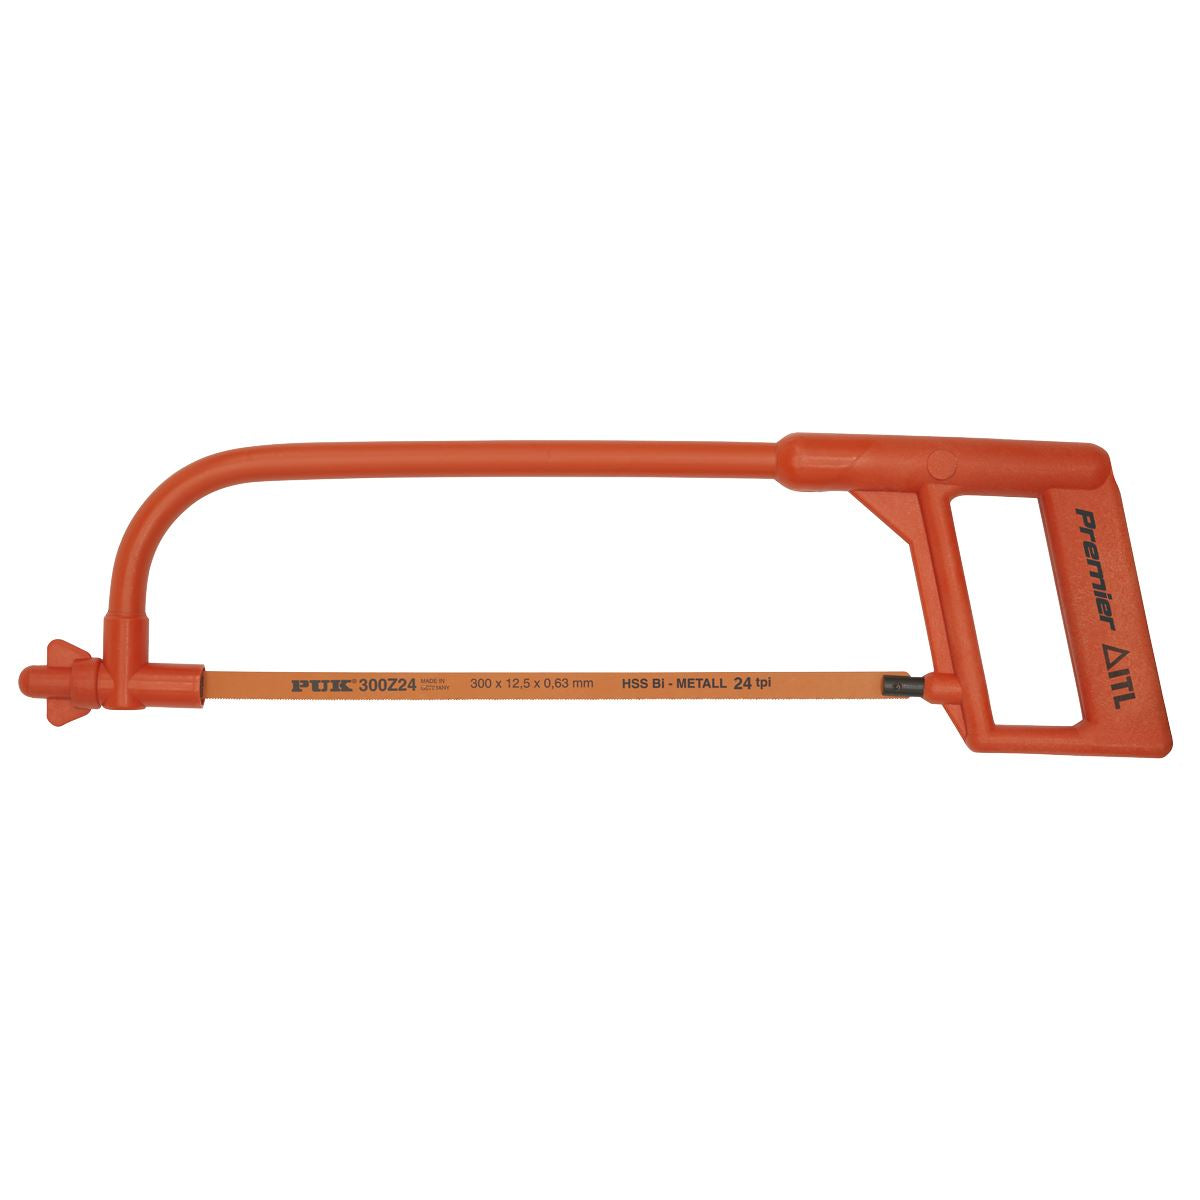 Sealey Premier Hacksaw Professional Insulated  300mm